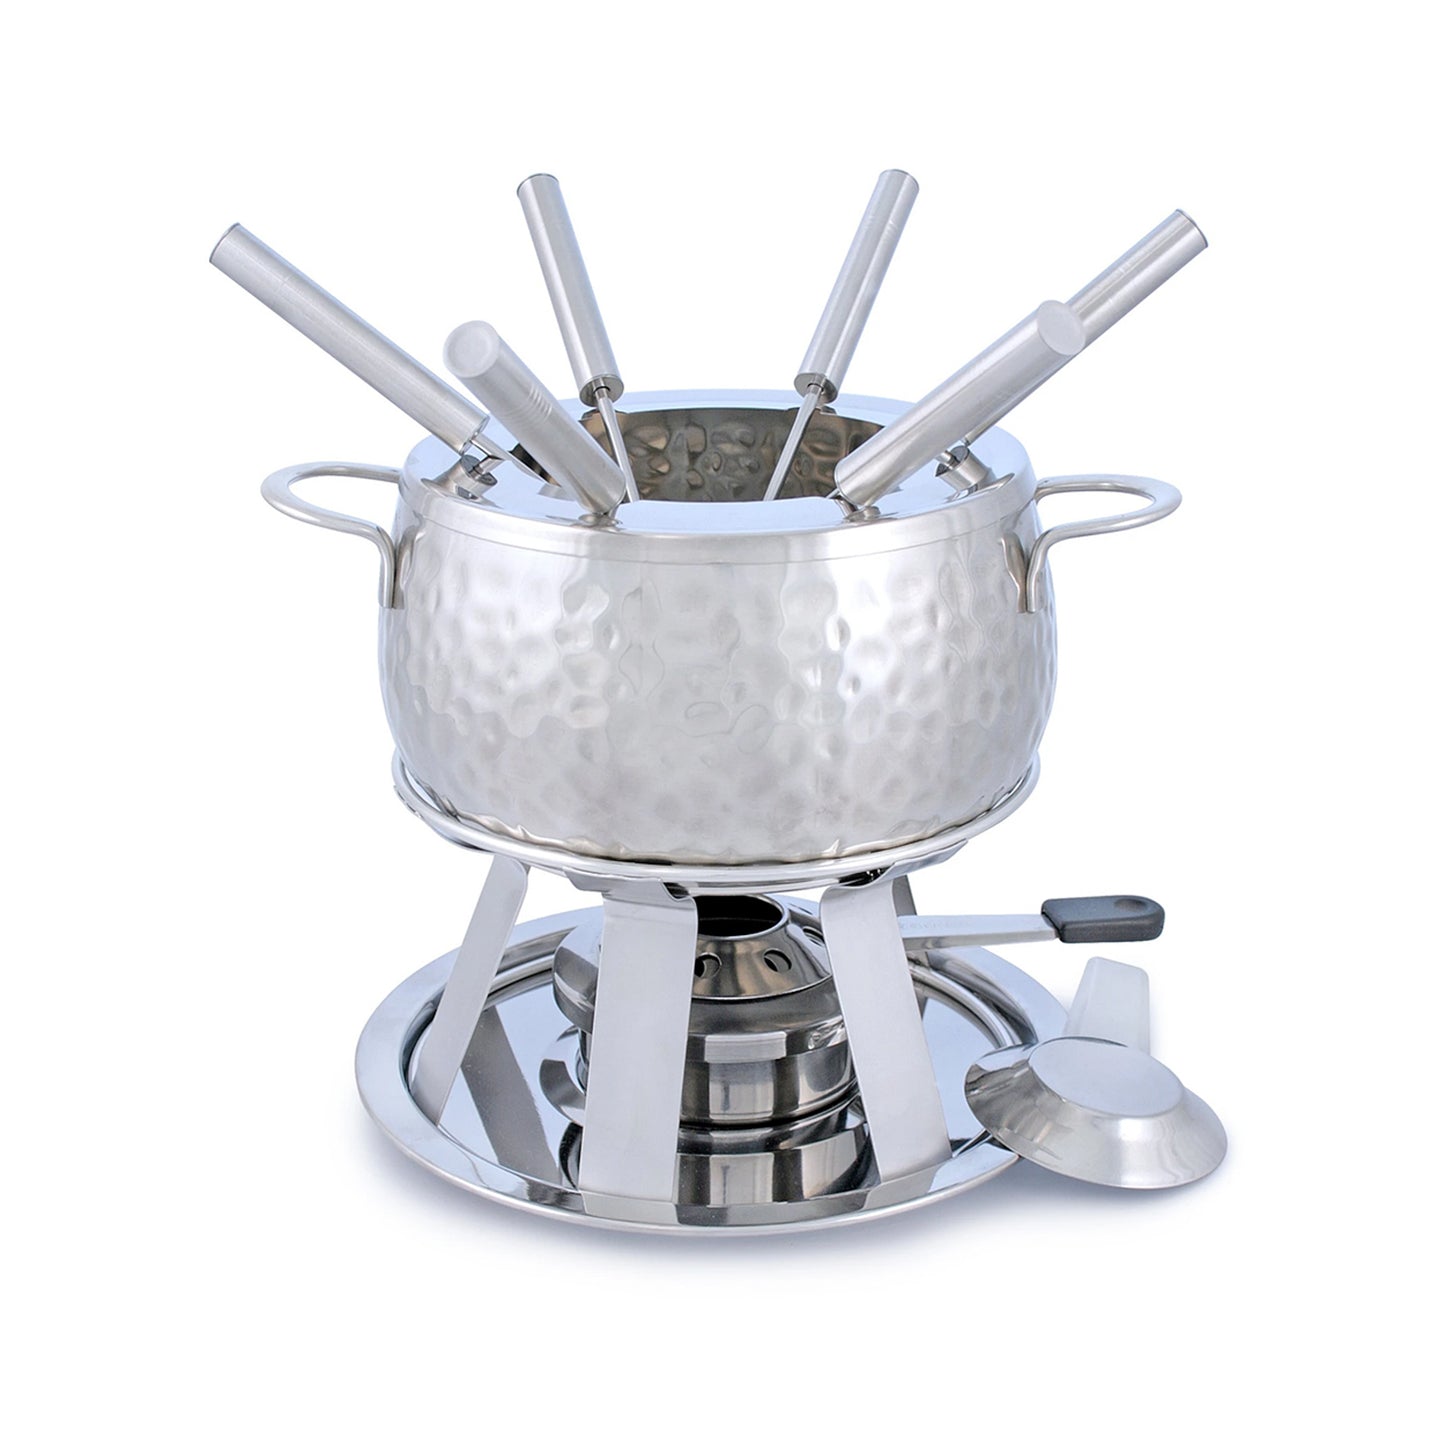 Hammered Stainless Steel Fondue Pot